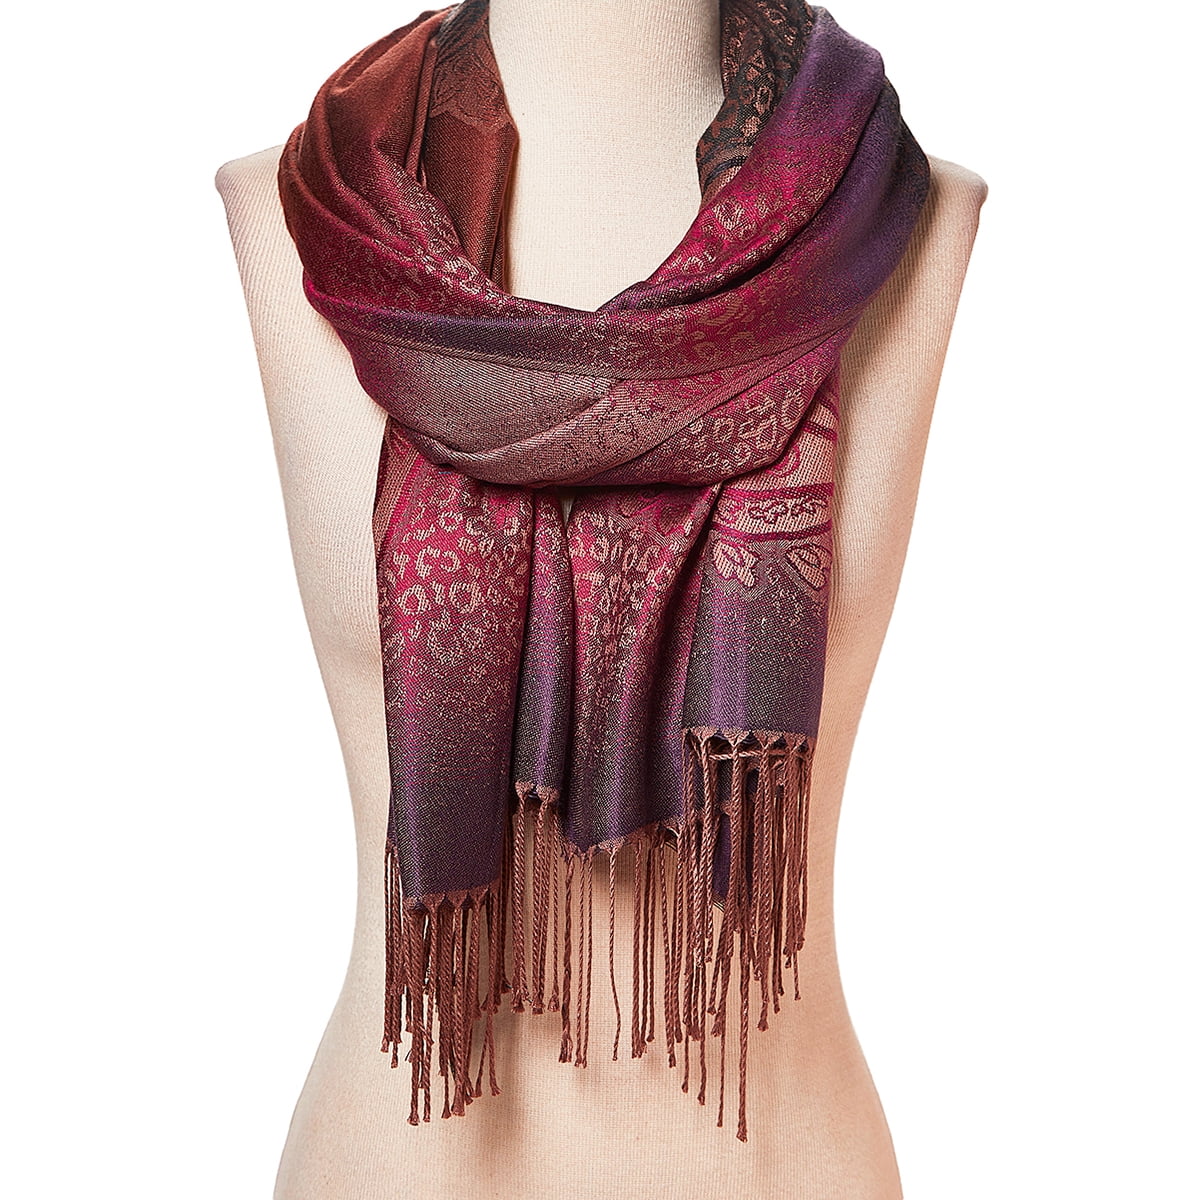 RED Fall Winter oversize Pashmina Scarf or Shawl Fashion accessories Gift for her valentines day Holiday Women gift.